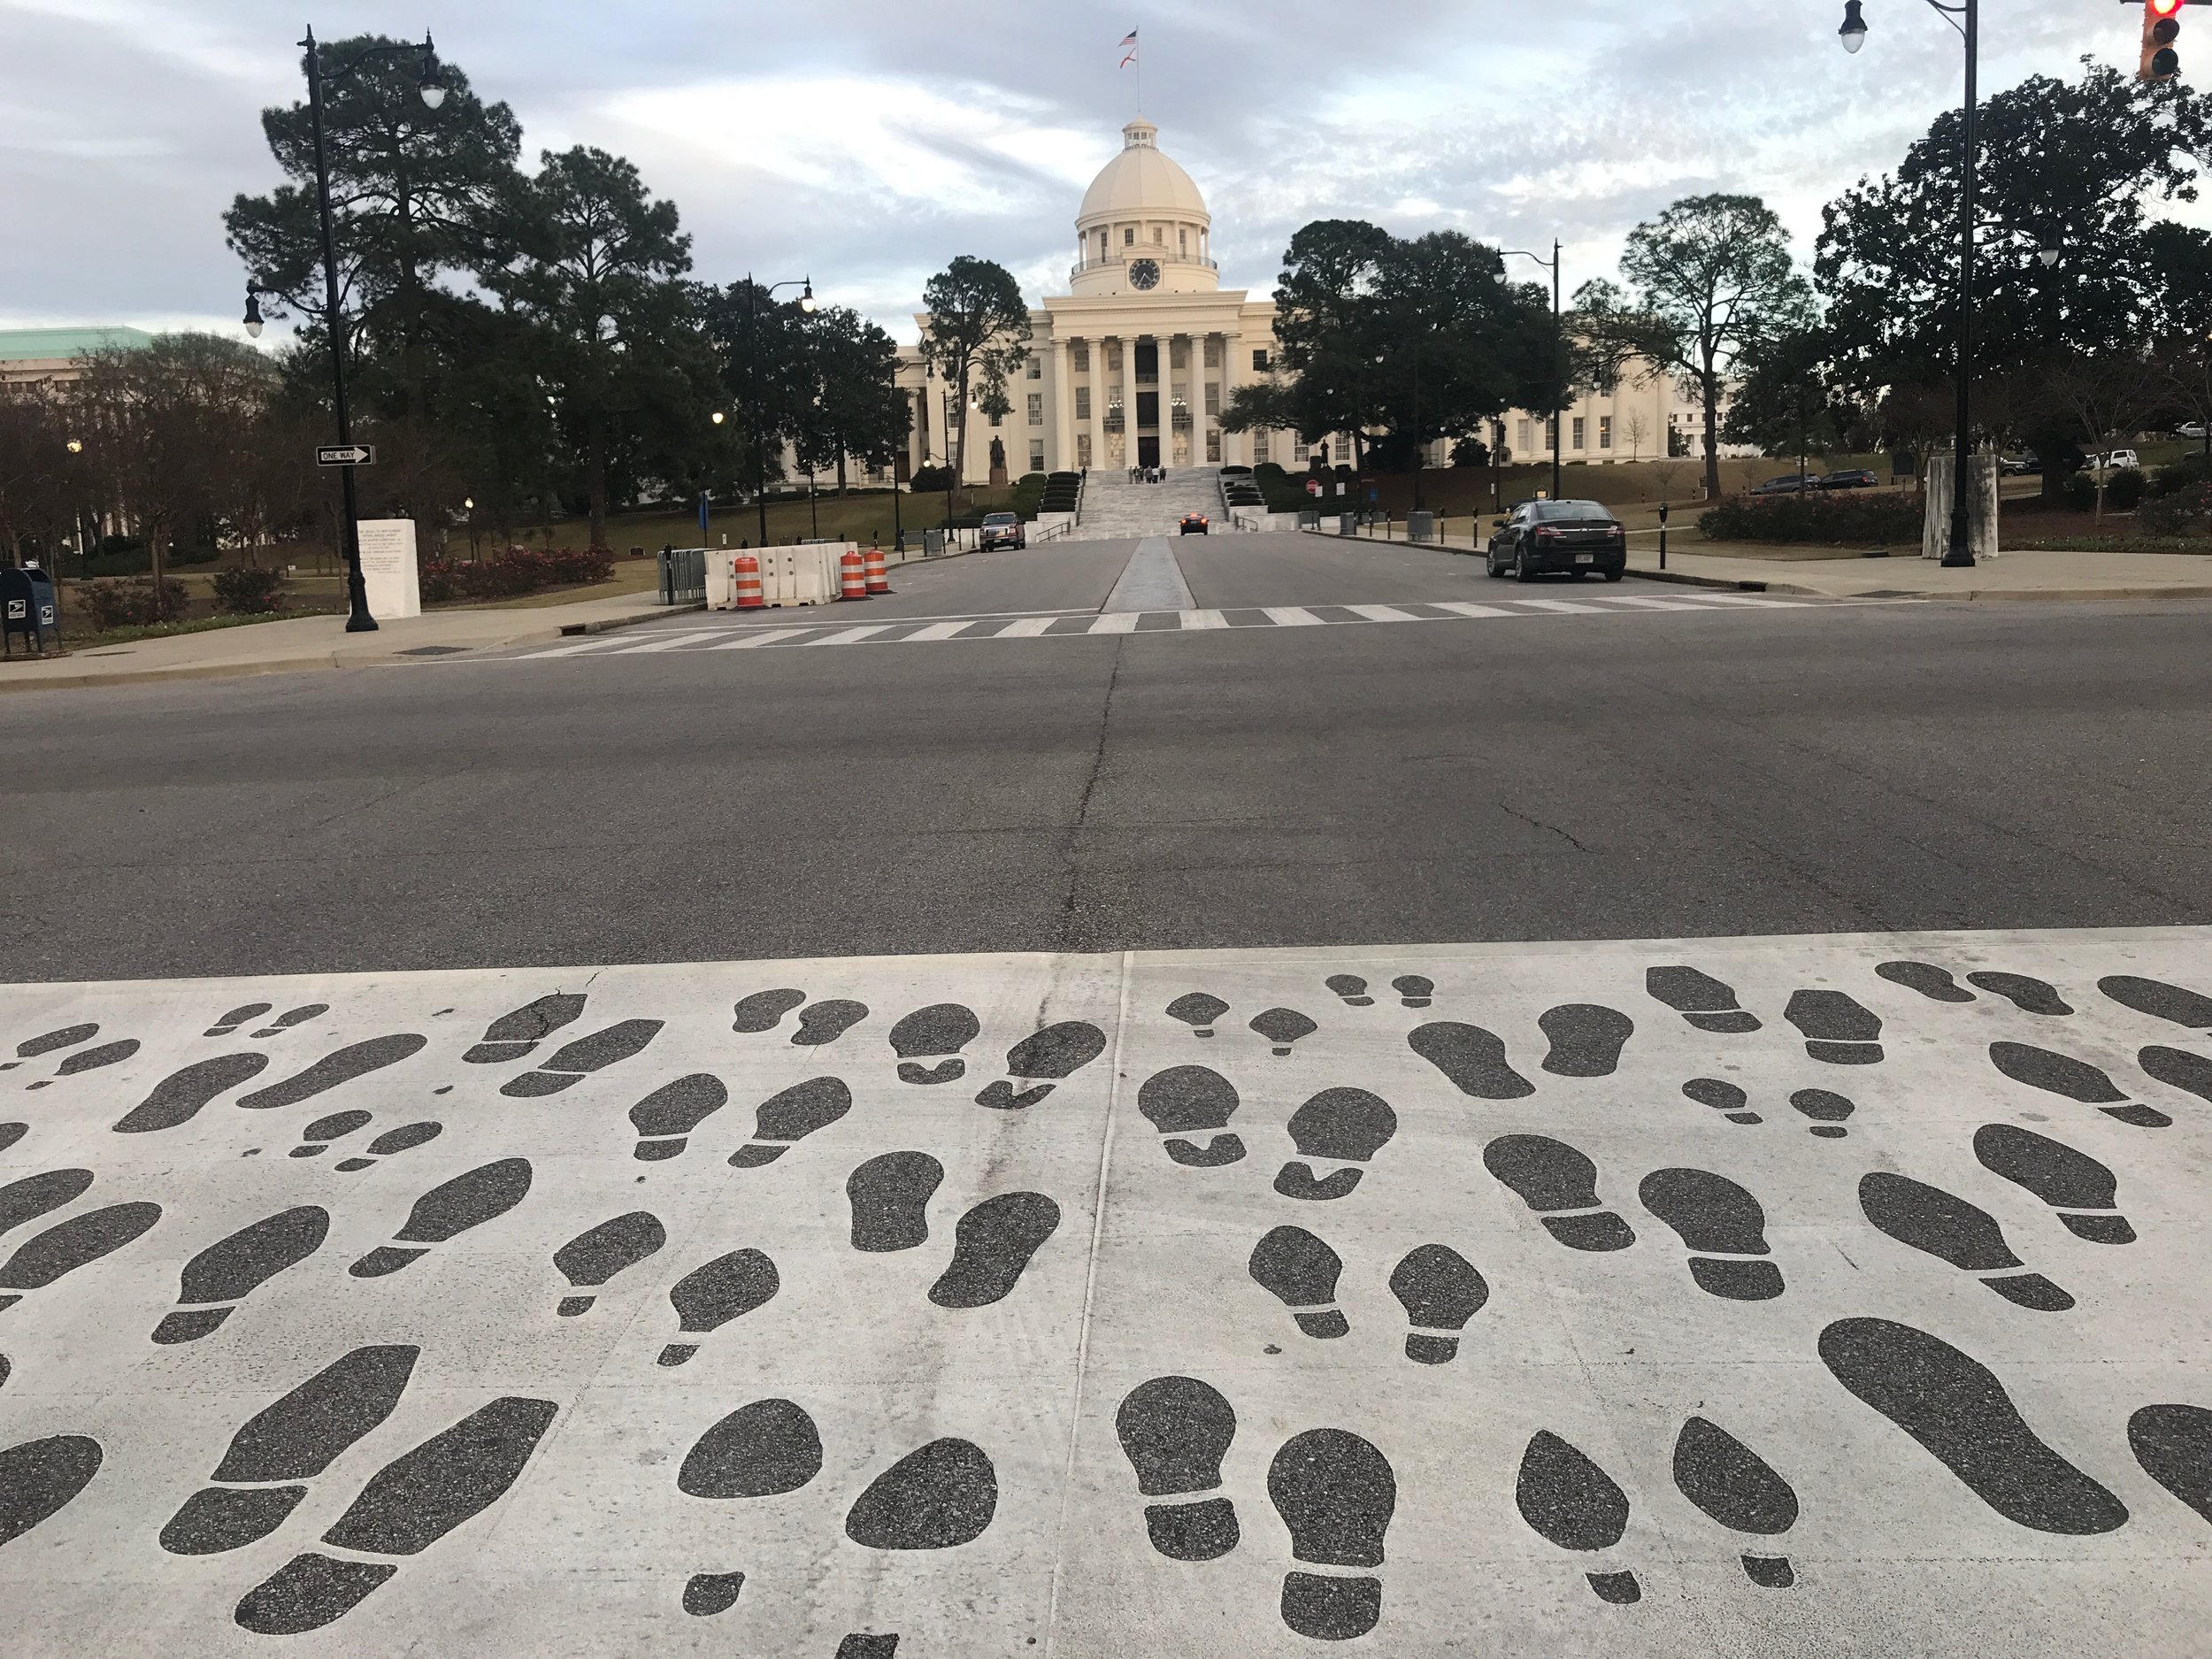  Painted footprints on Dexter Ave. mark the route of the 1965 March for Voting Rights that began in Selma and ended at the foot of the Alabama State Capitol in Montgomery.      